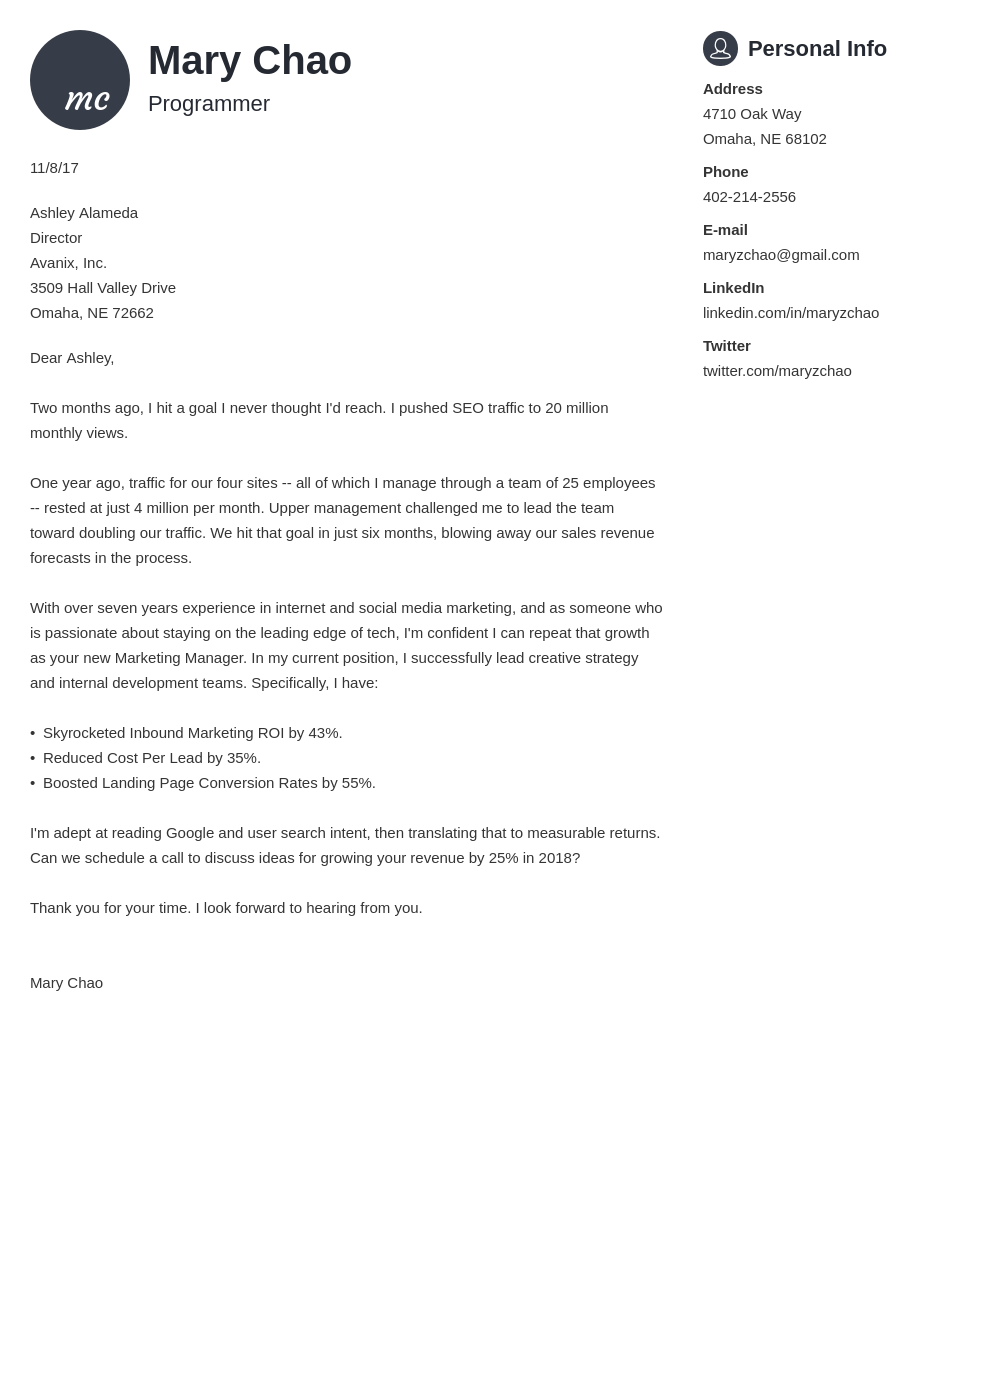 covering letter template uk 2020